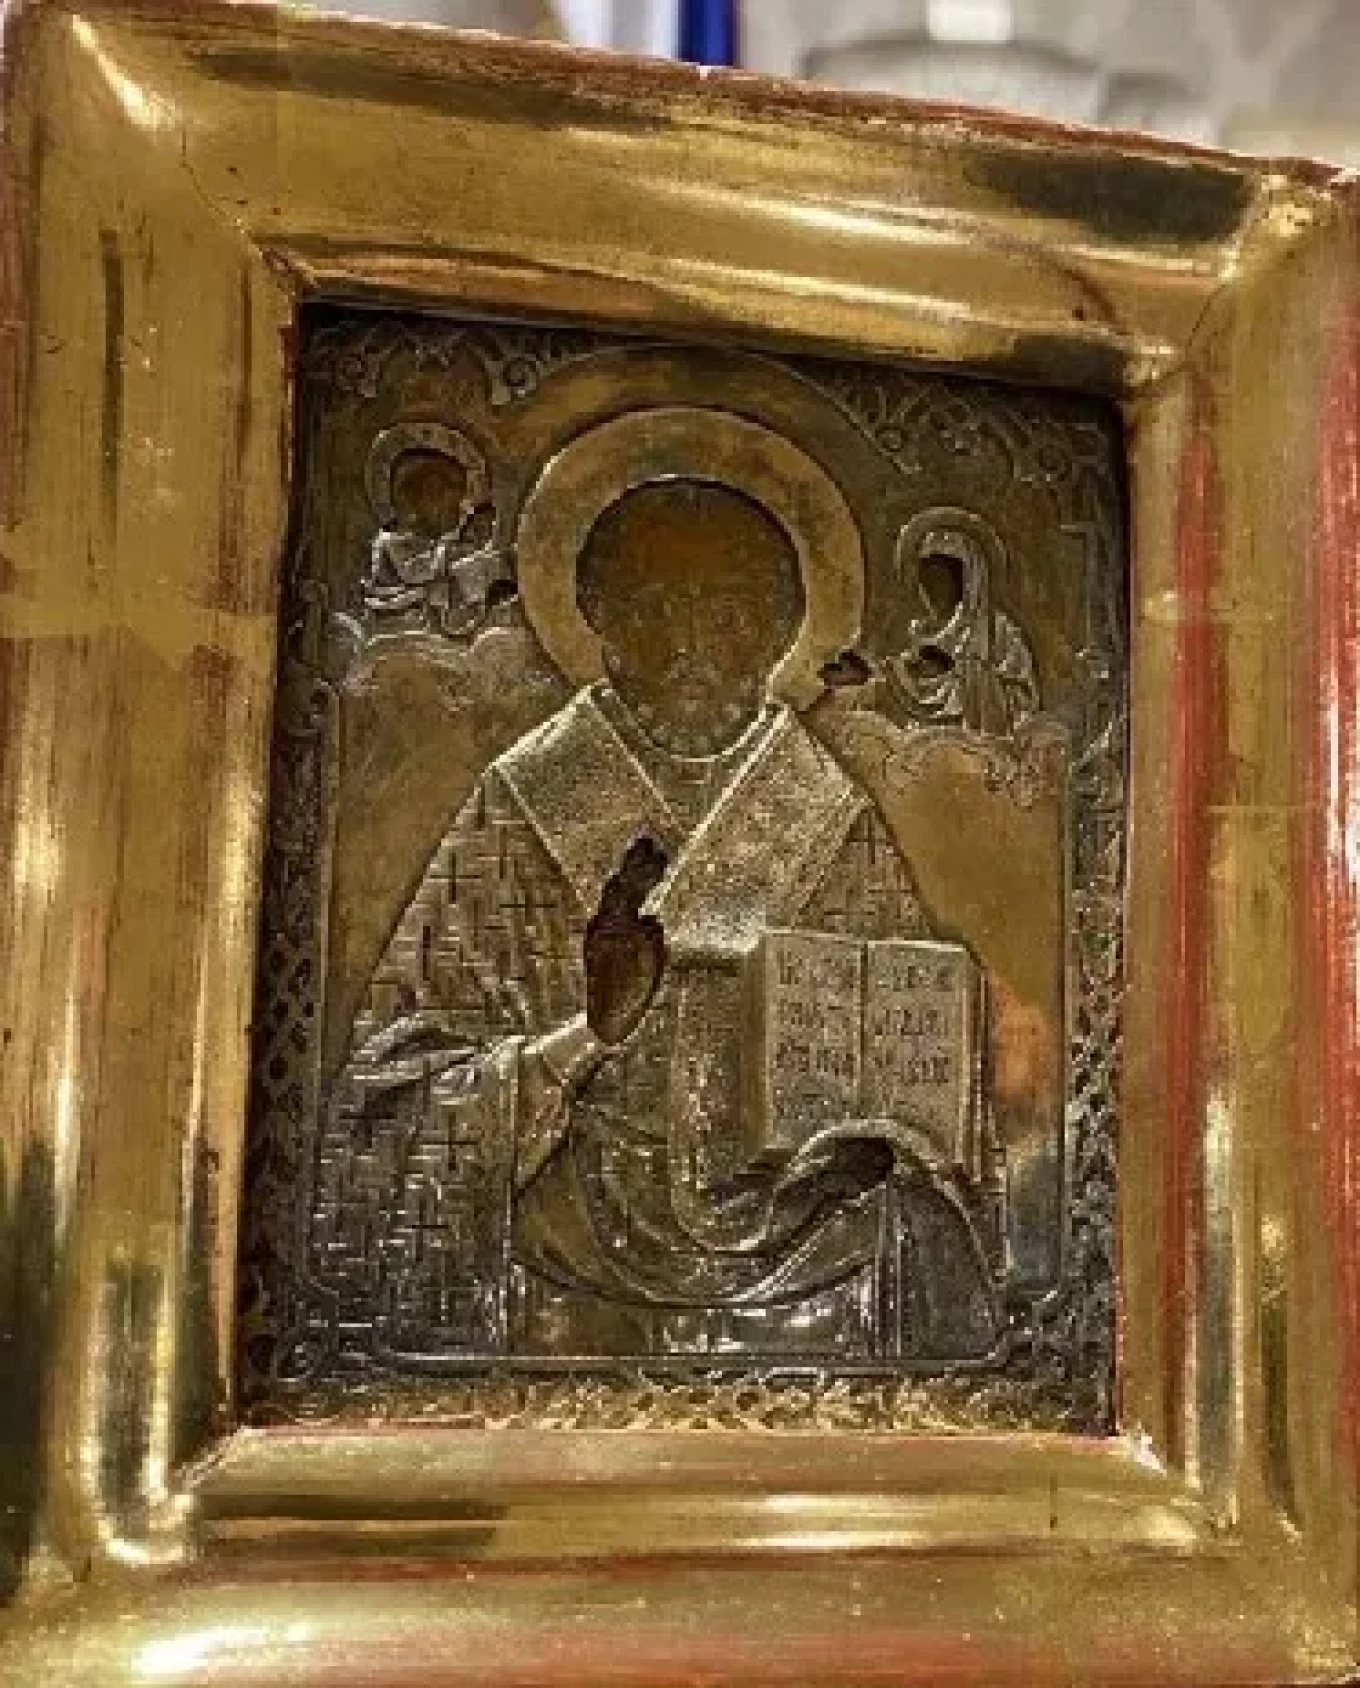 
					Ukraine has demanded an urgent explanation of the gilded icon's origins.					 					Russian Foreign Ministry				